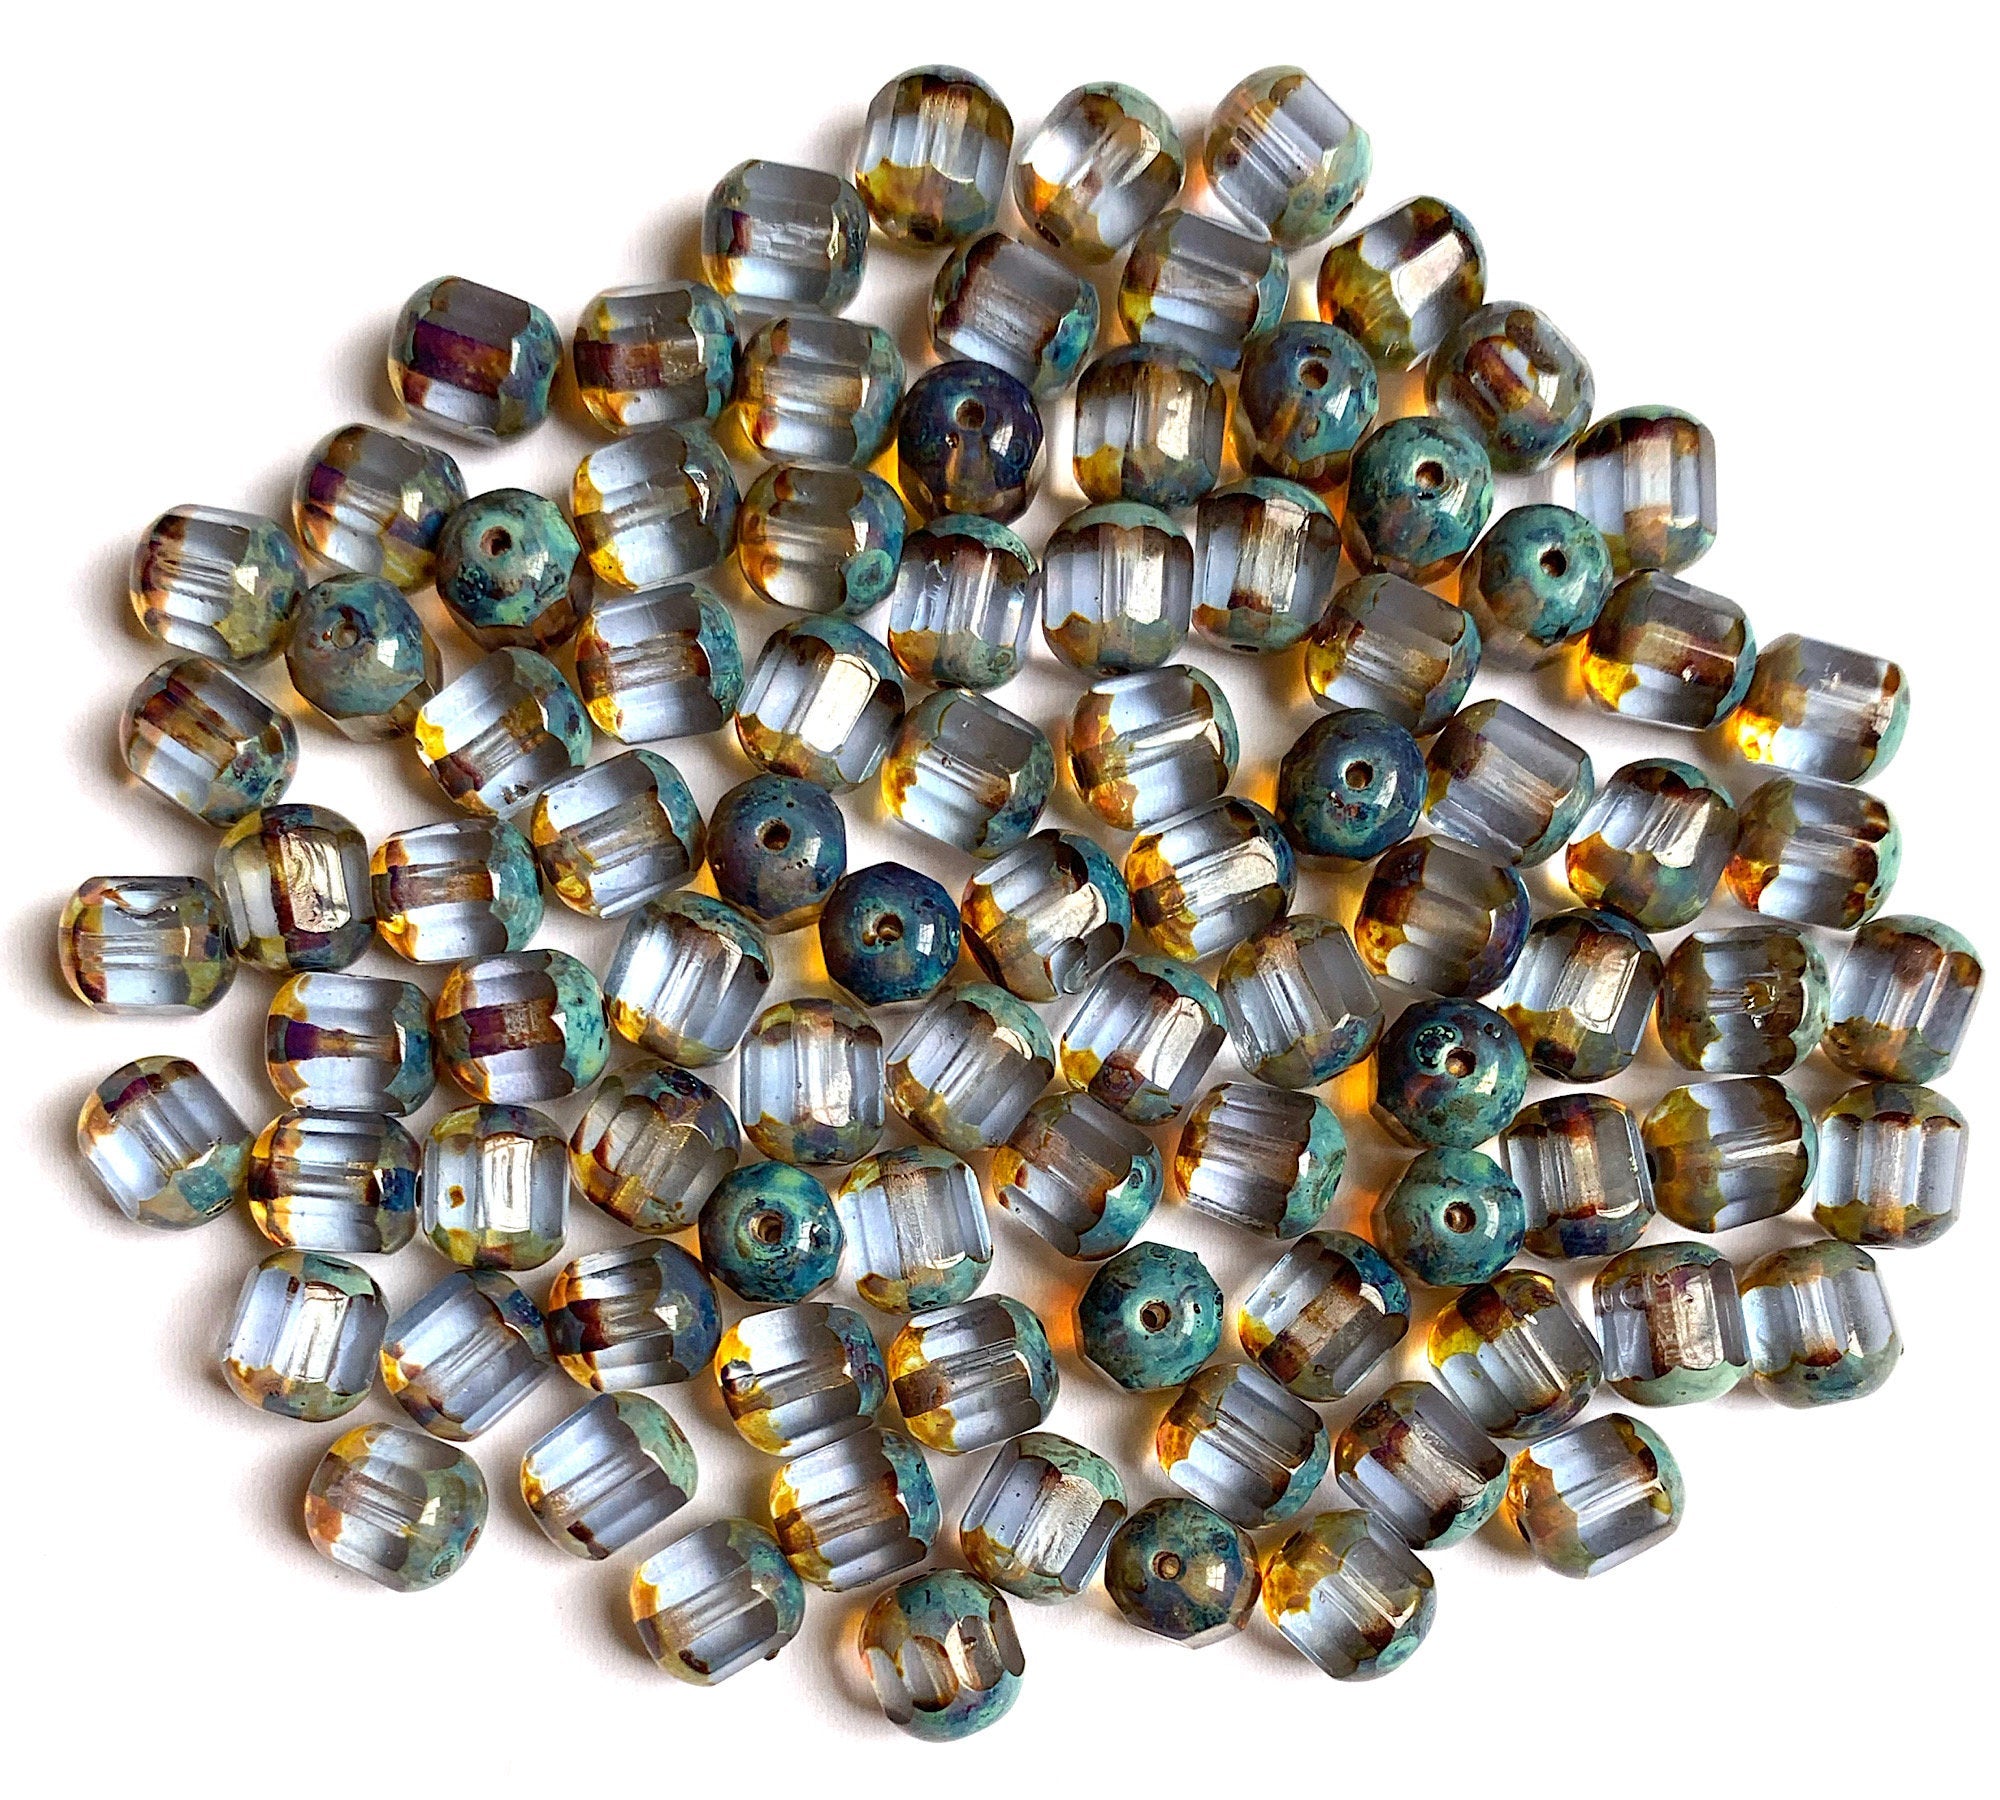 3mm Opaque Luster Picasso Fire Polished Round Beads -- Choose Your Color Mixed (1095) Czech Glass Beads by GR8BEADS - The Bead Obsession